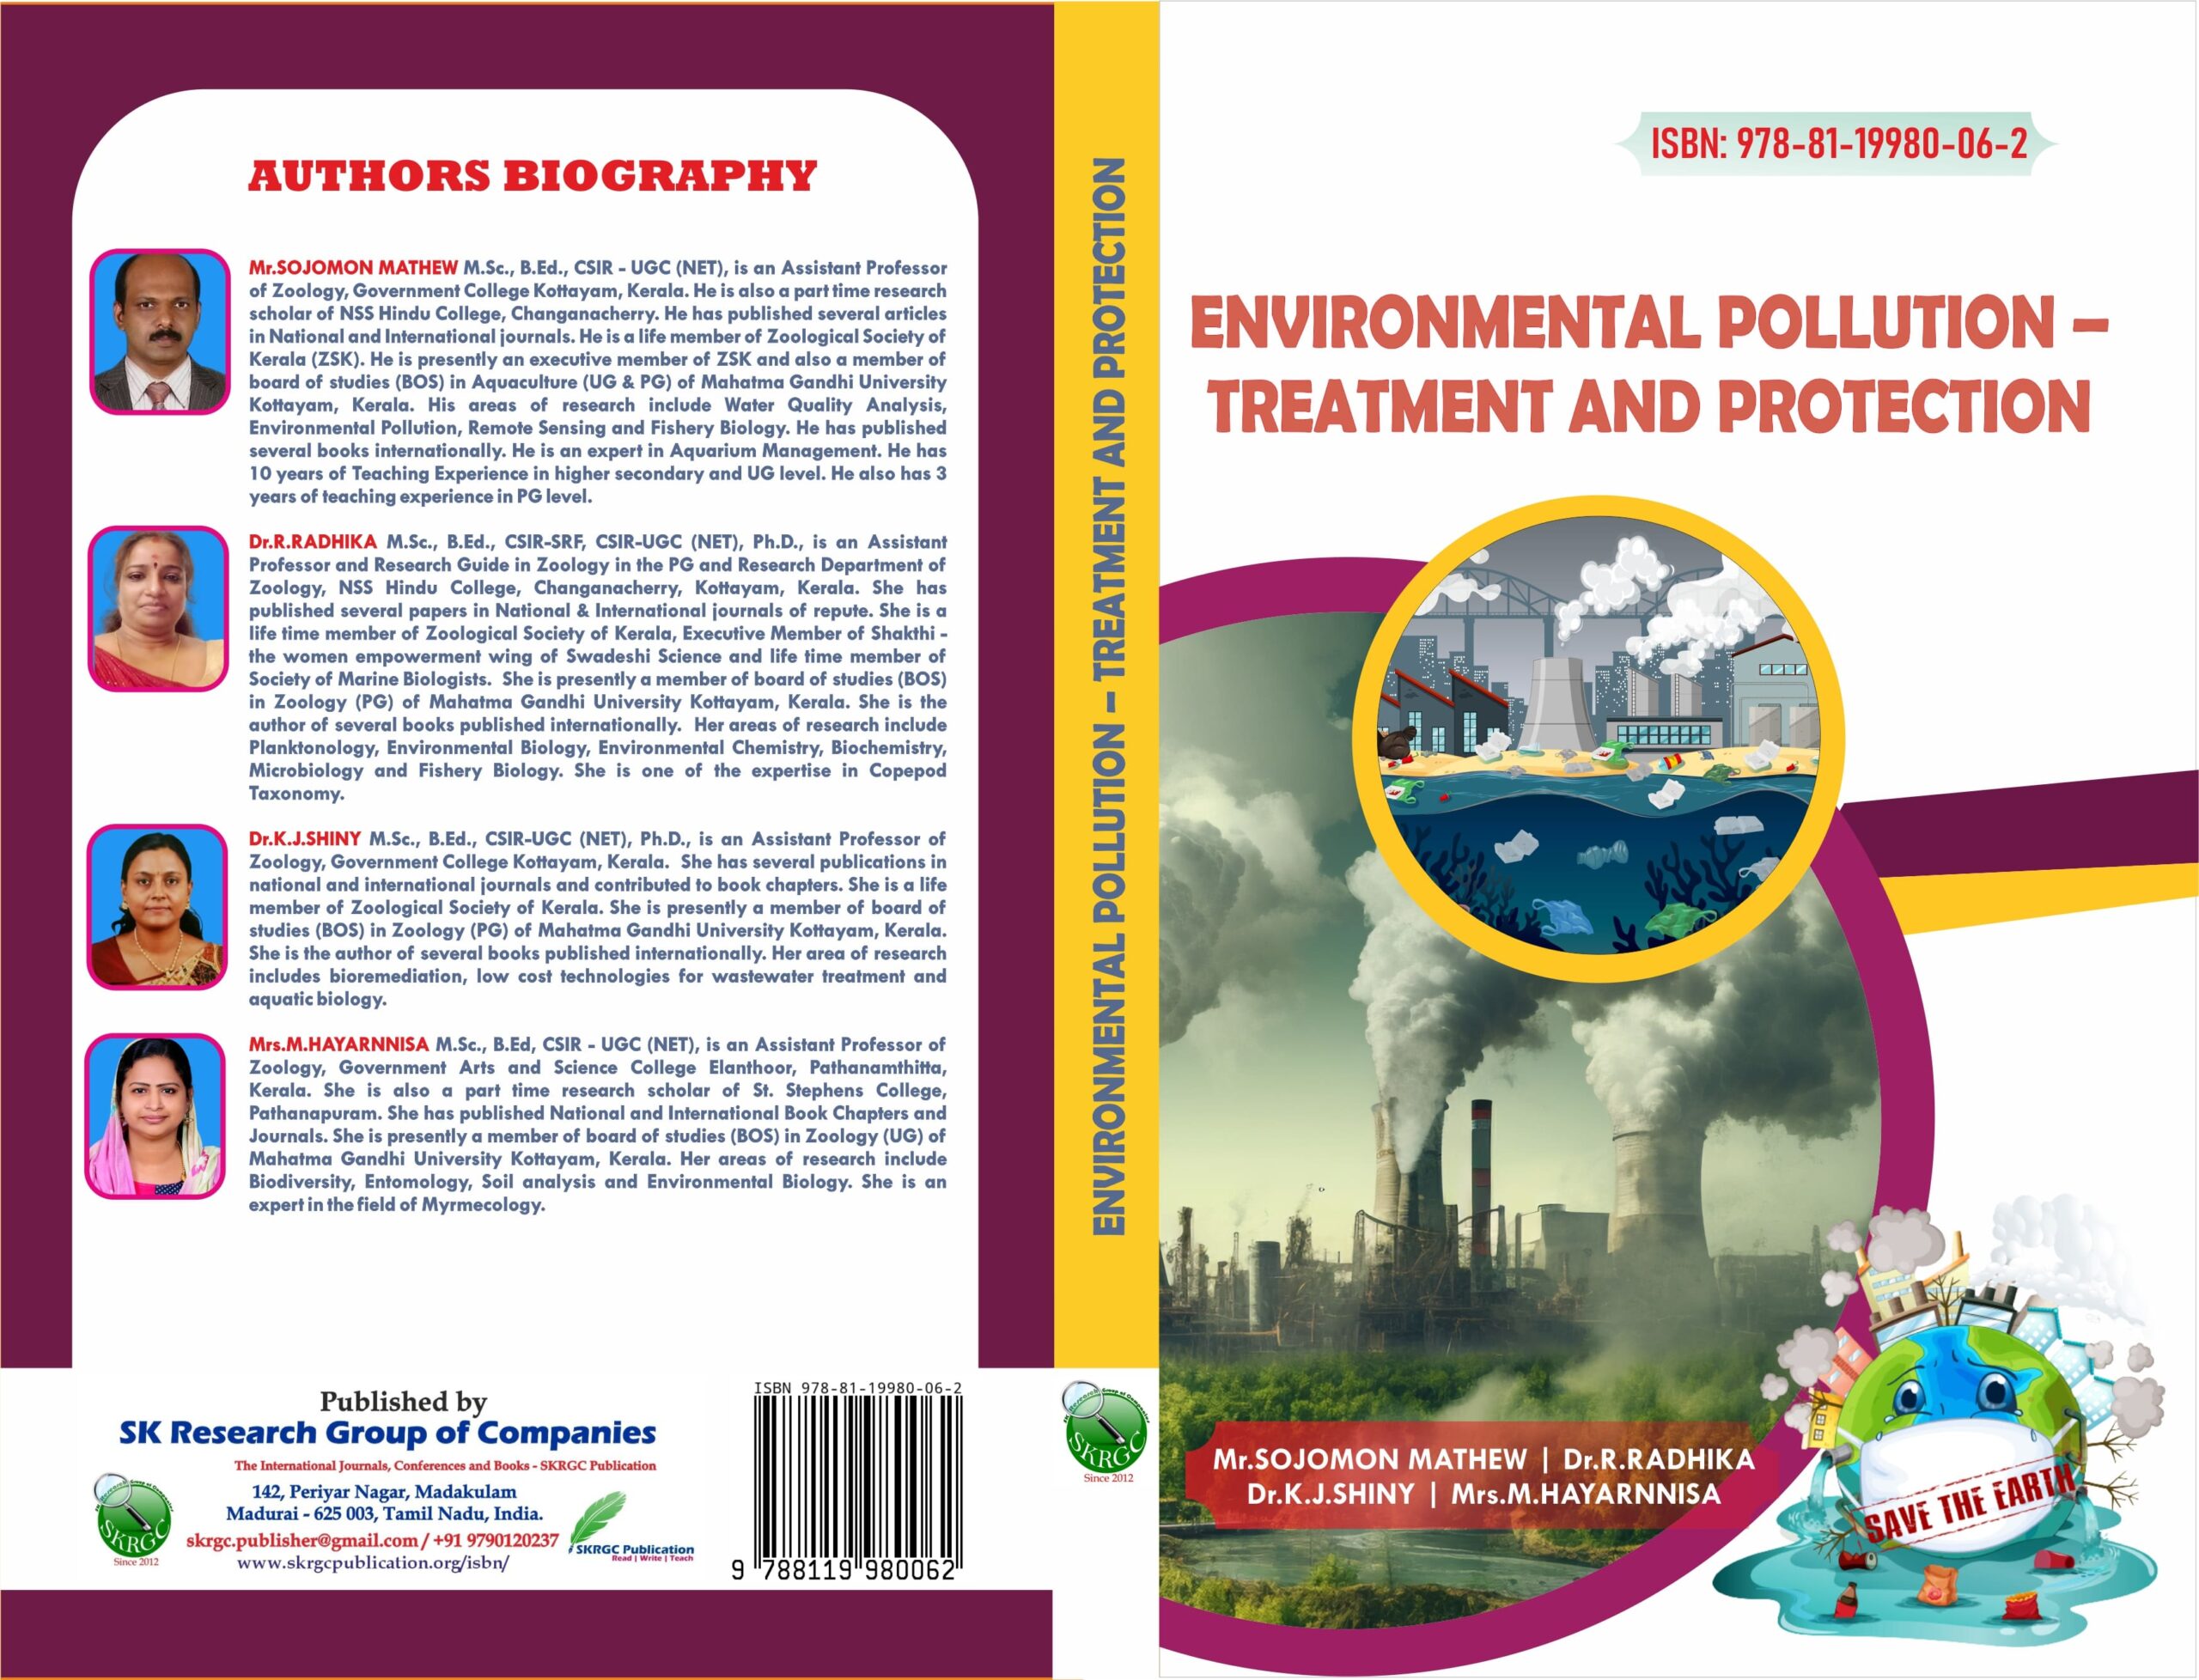 ENVIRONMENTAL POLLUTION – TREATMENT AND PROTECTION